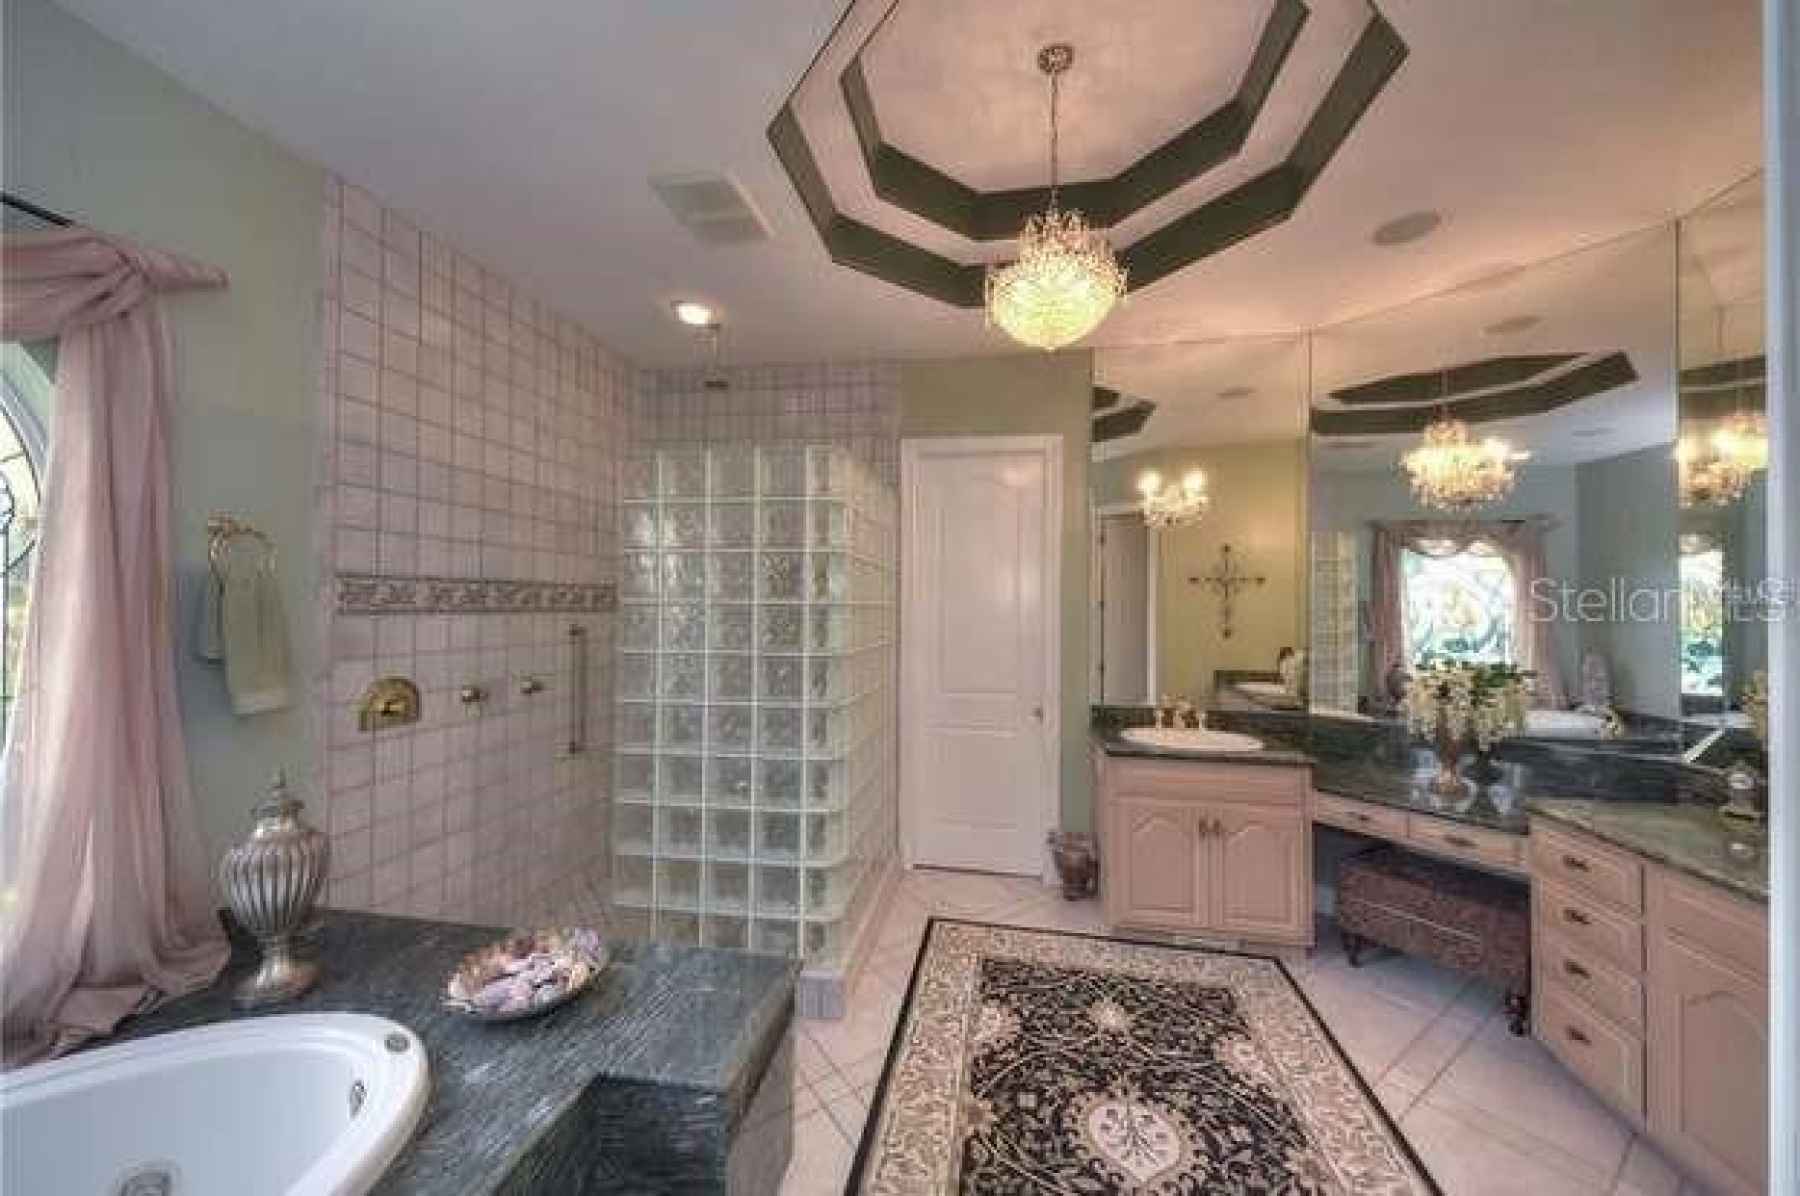 Luxurious Master Bath and Spa